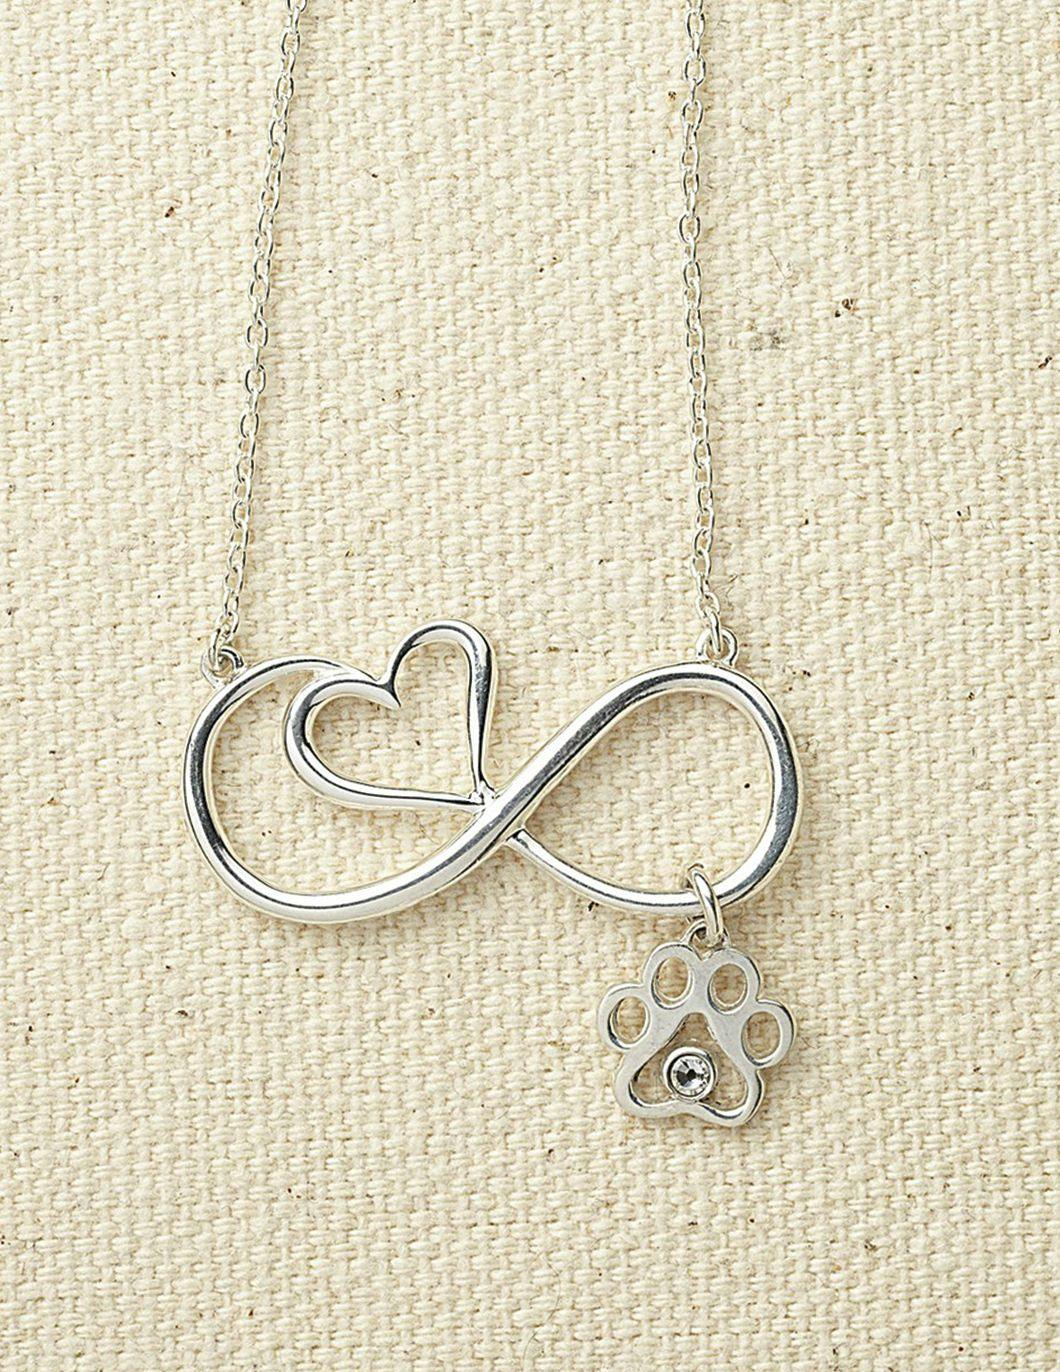 infinity-heart-pendant-with-paw-and-crystal